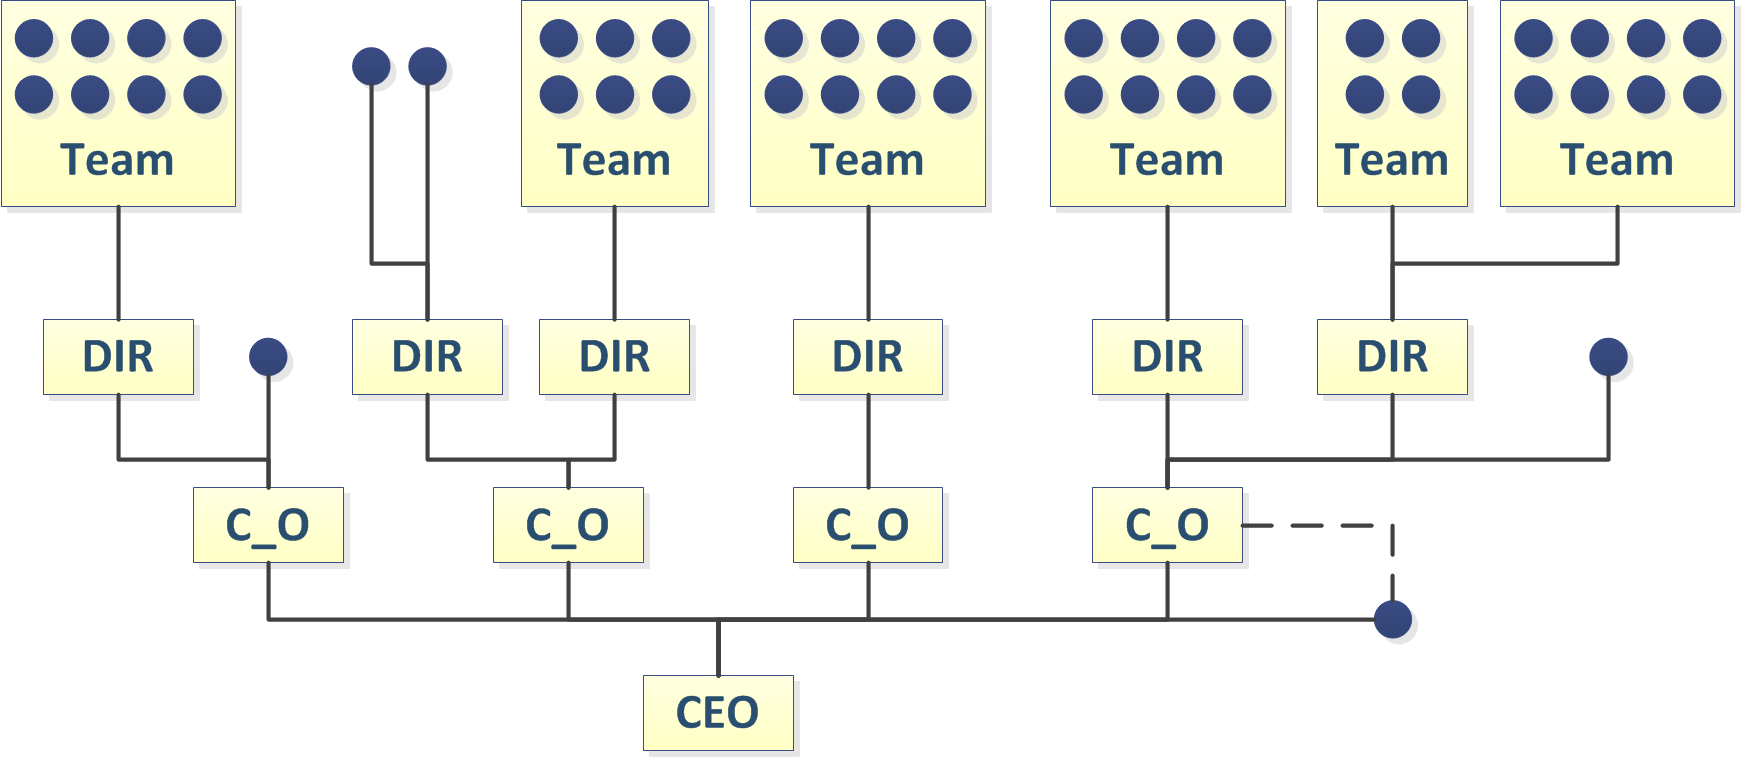 Inverted Org Chart